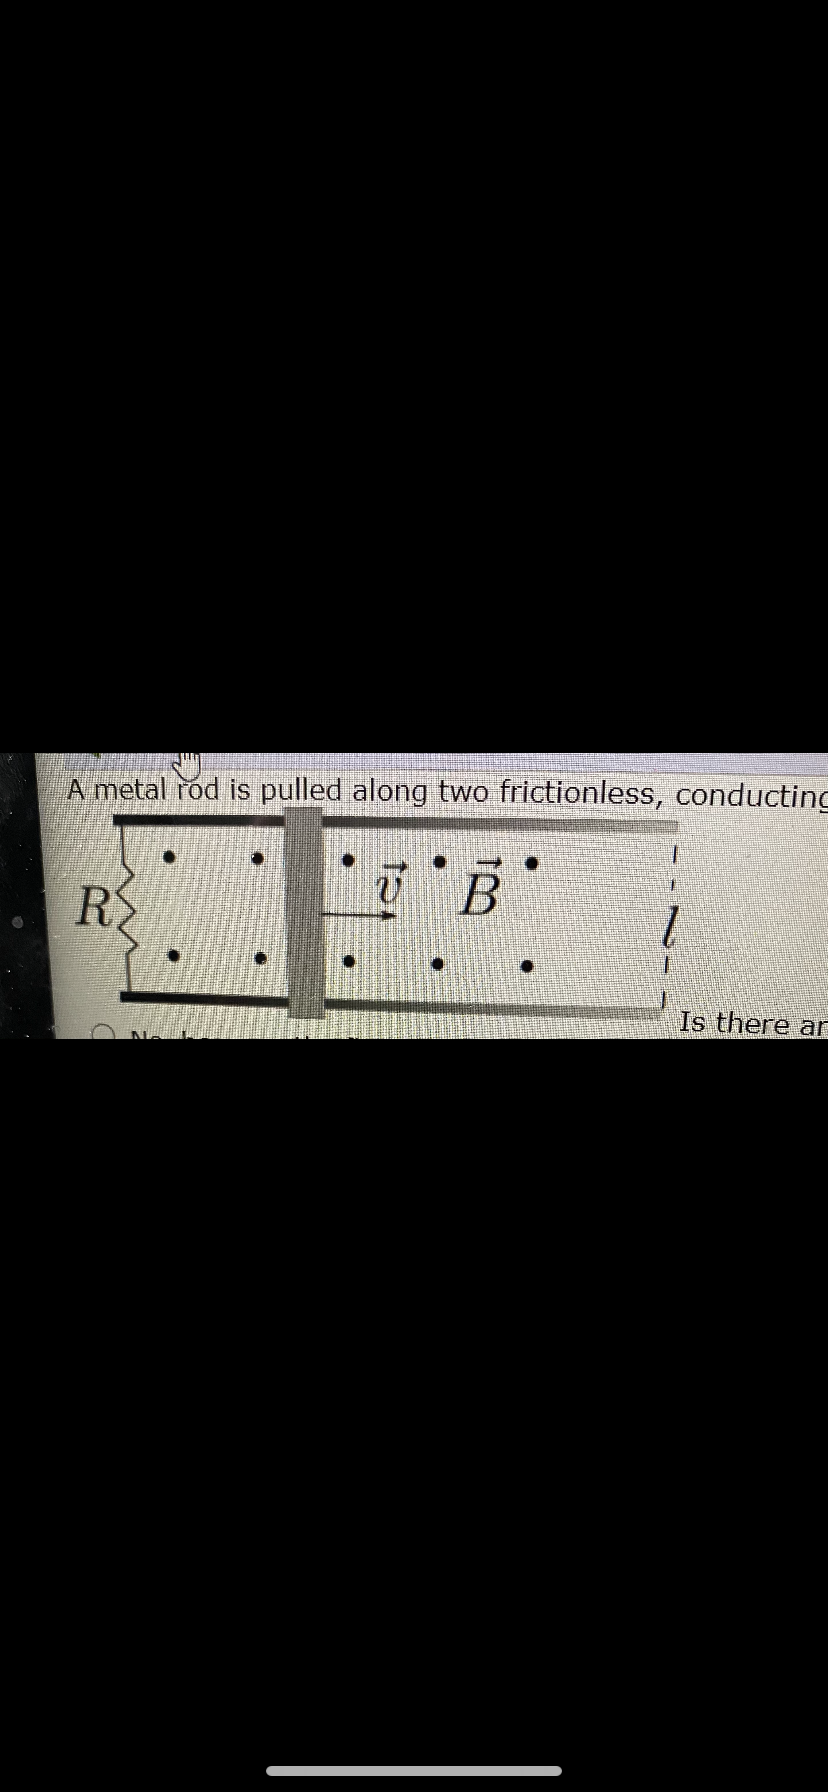 A metal rod is pulled along two frictionless, conducting
R
Is there ar
